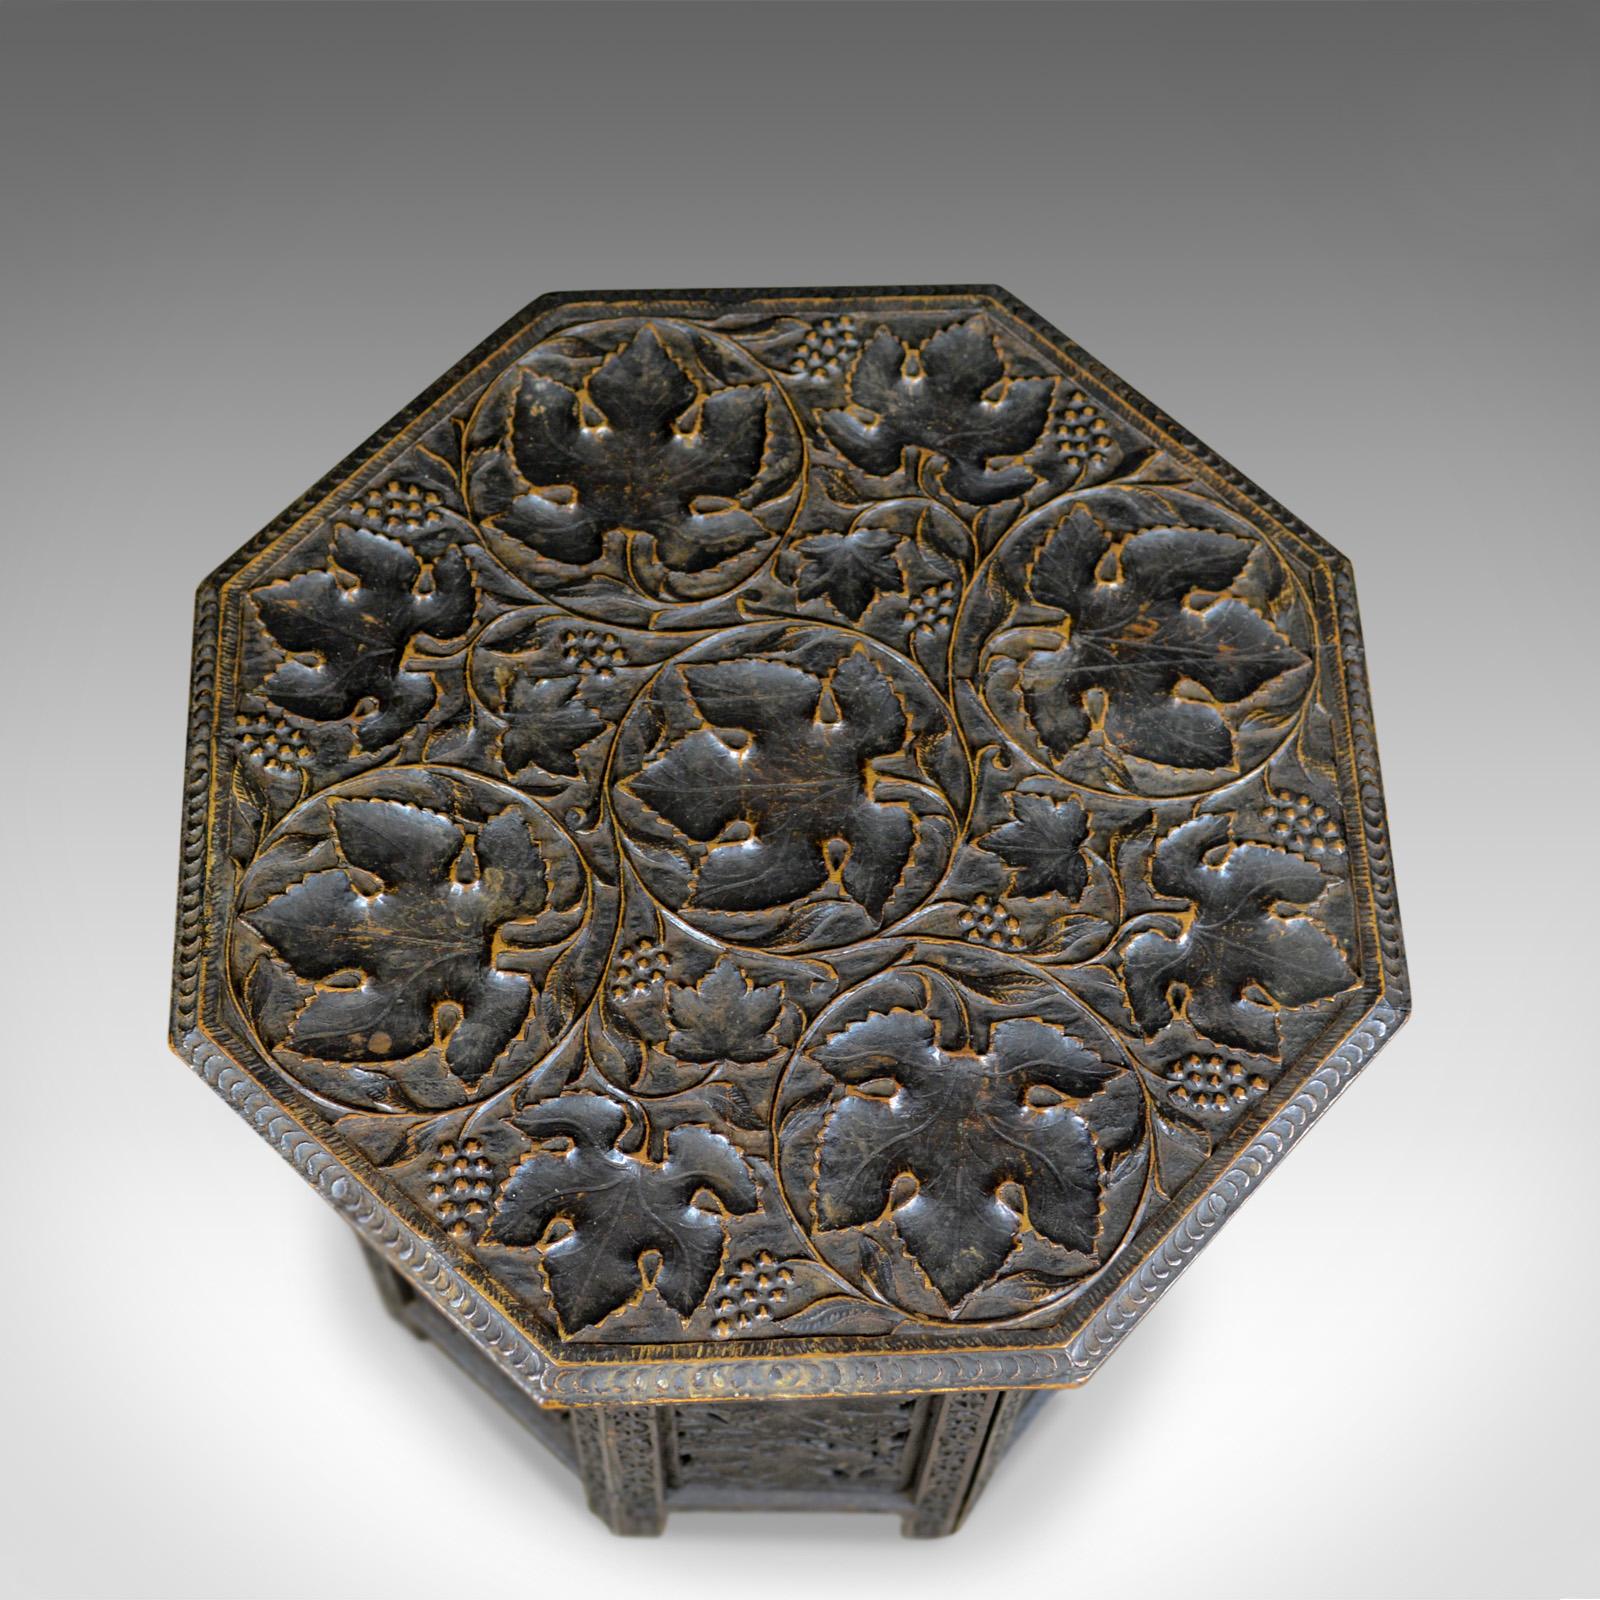 This is an antique campaign table, a beautifully carved, Asian, teak side table dating to the turn of the century, circa 1900.

Profusely carved in deep relief
Fruit and foliate detail to the octagonal top
Pierced detailing to panel